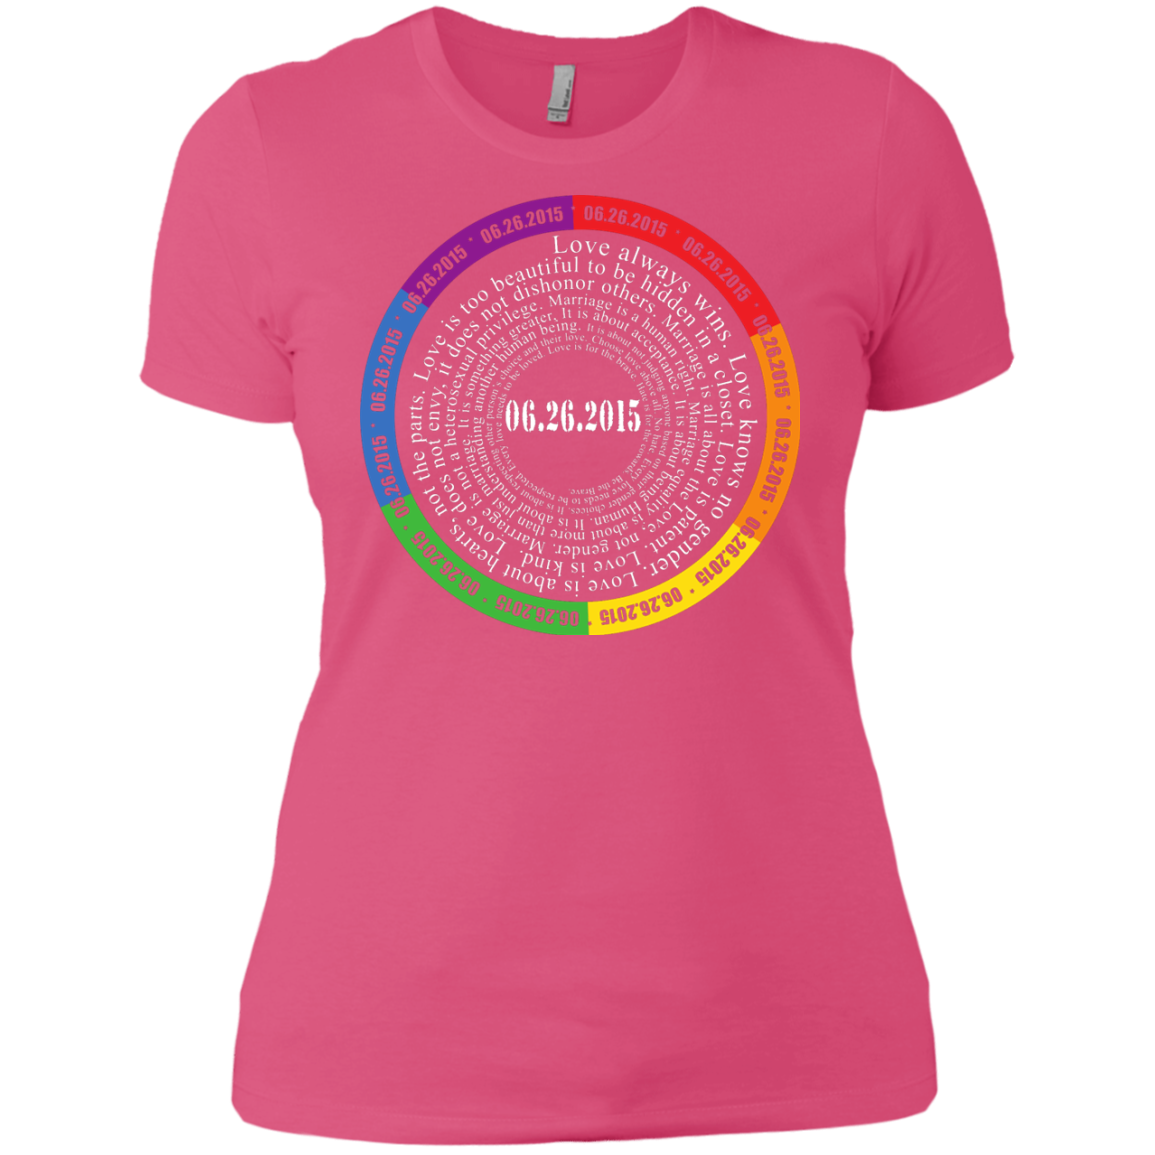 The "Pride Month" Special Shirt LGBT Pride pink shirt for women